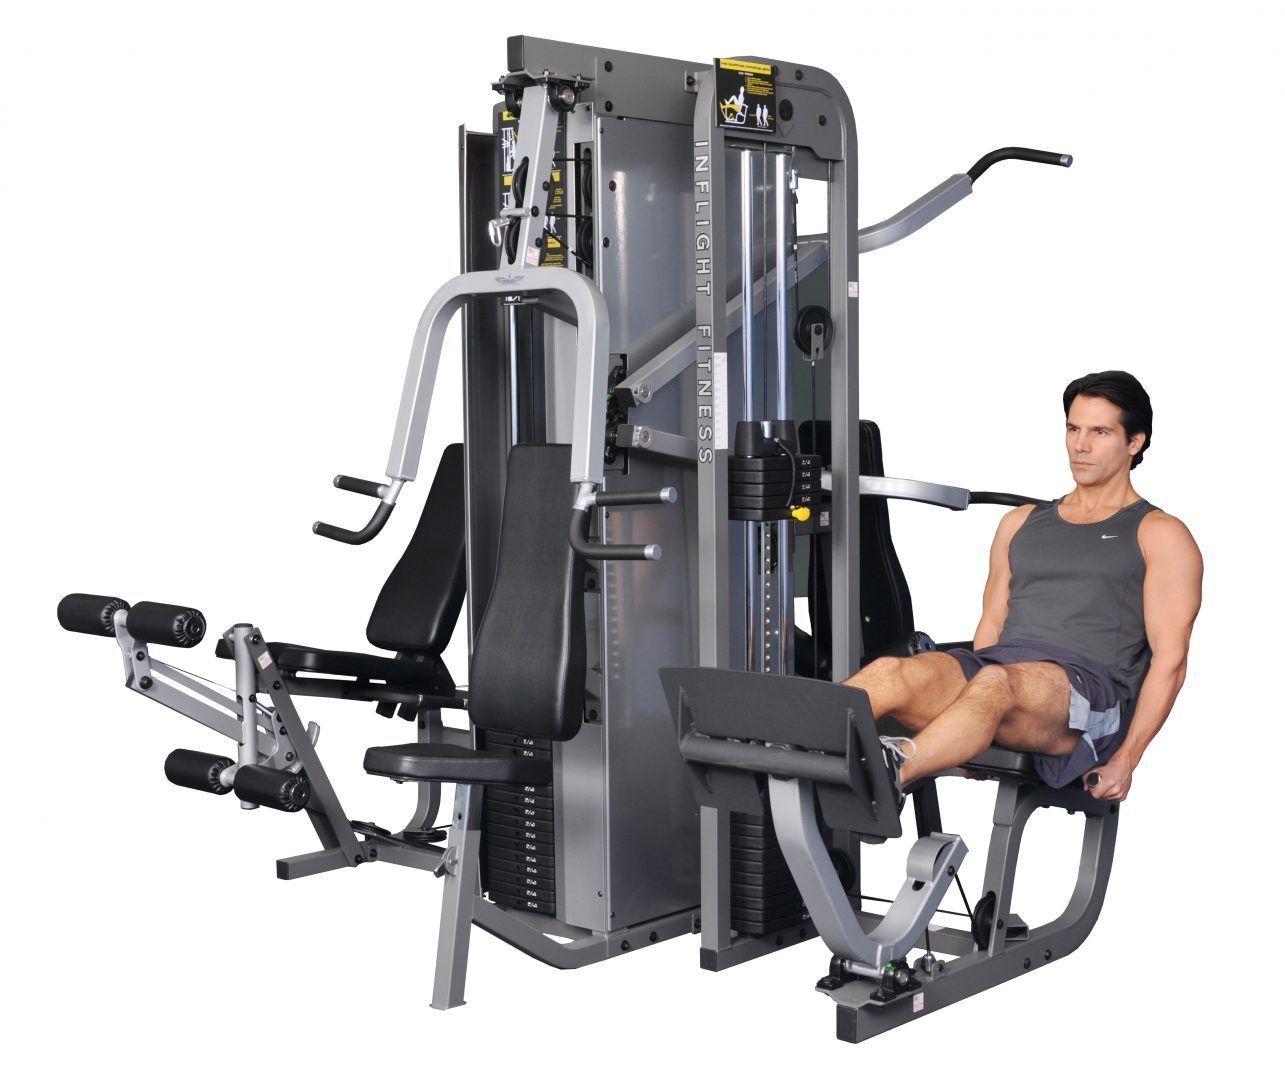 Multi-Stations- Best Gym Equipment for Full Body Workout - Into Wellness